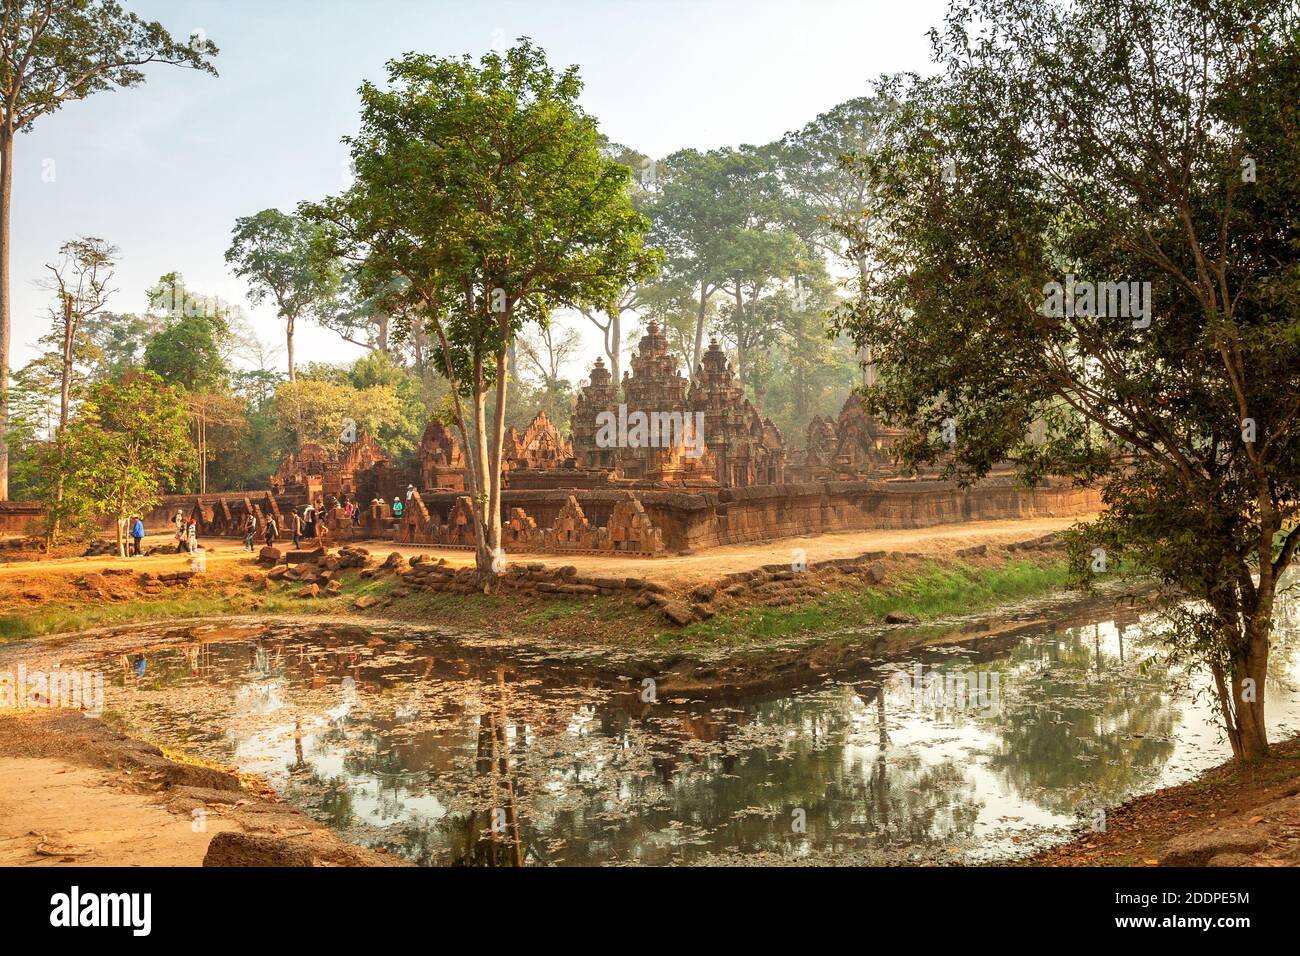 Banteay Srei or Banteay Srey - 10th-century Cambodian temple in area of Angkor near Siem Reap, Cambodia Stock Photo